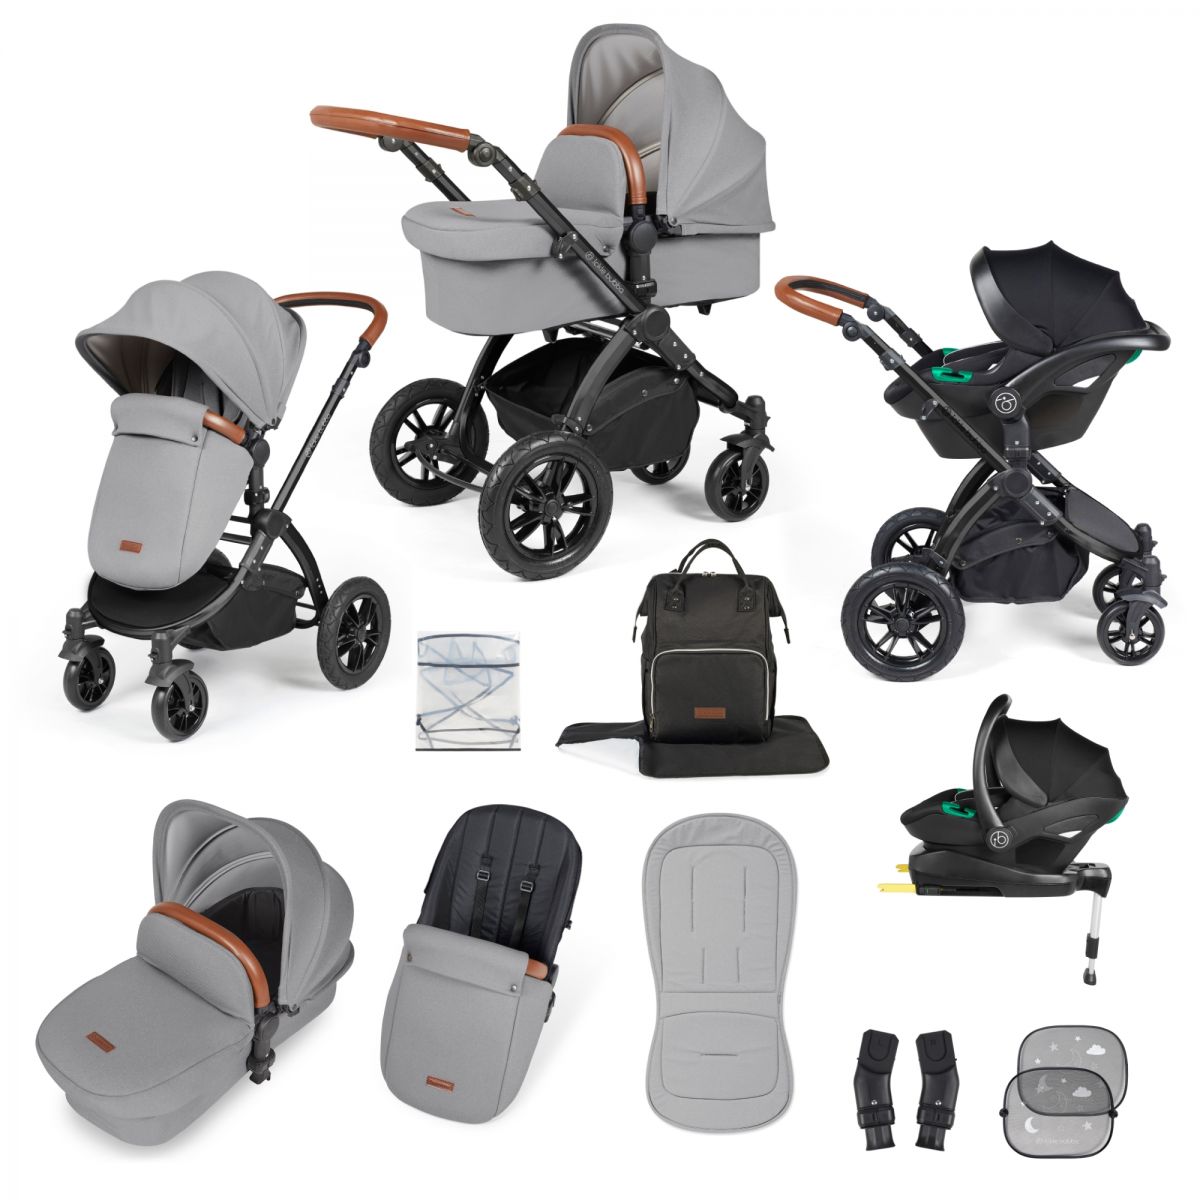 Ickle Bubba Stomp Luxe Black Frame Travel System with Stratus -Size Carseat & Isofix Base